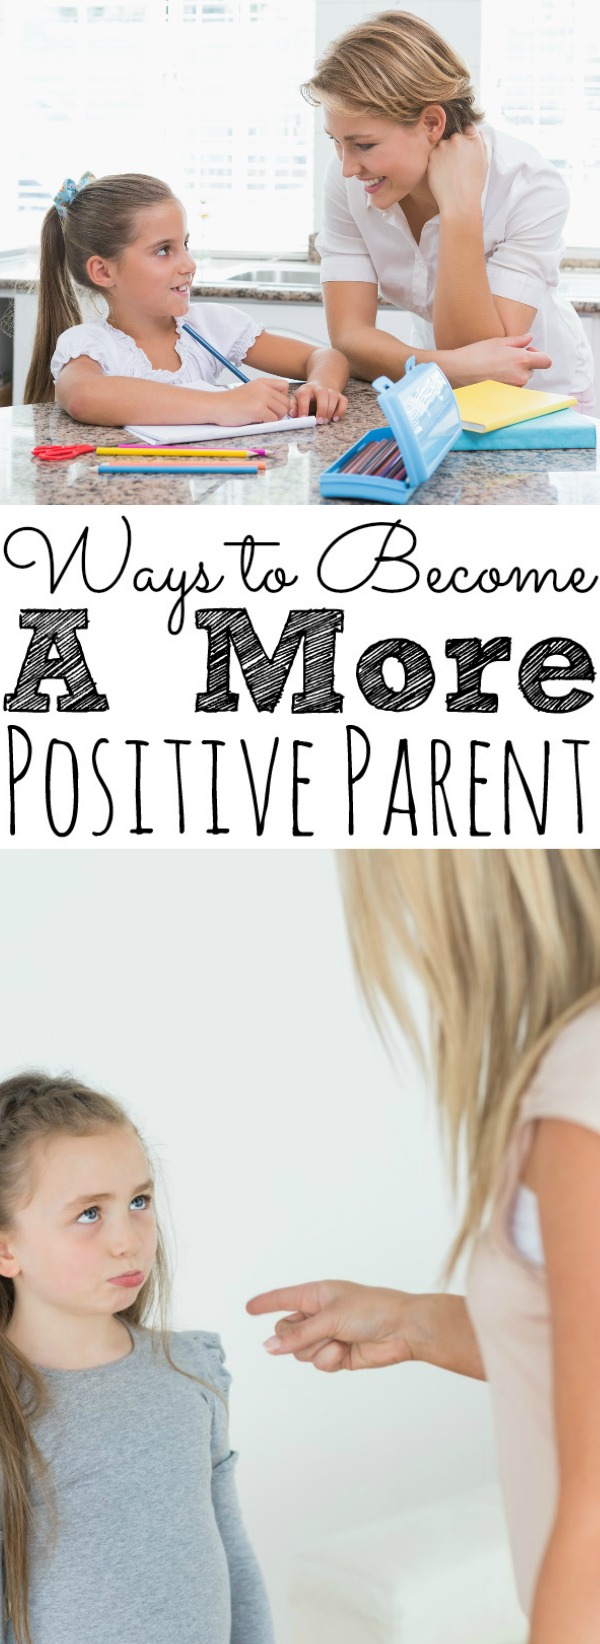 Ways To Become A More Positive Parent